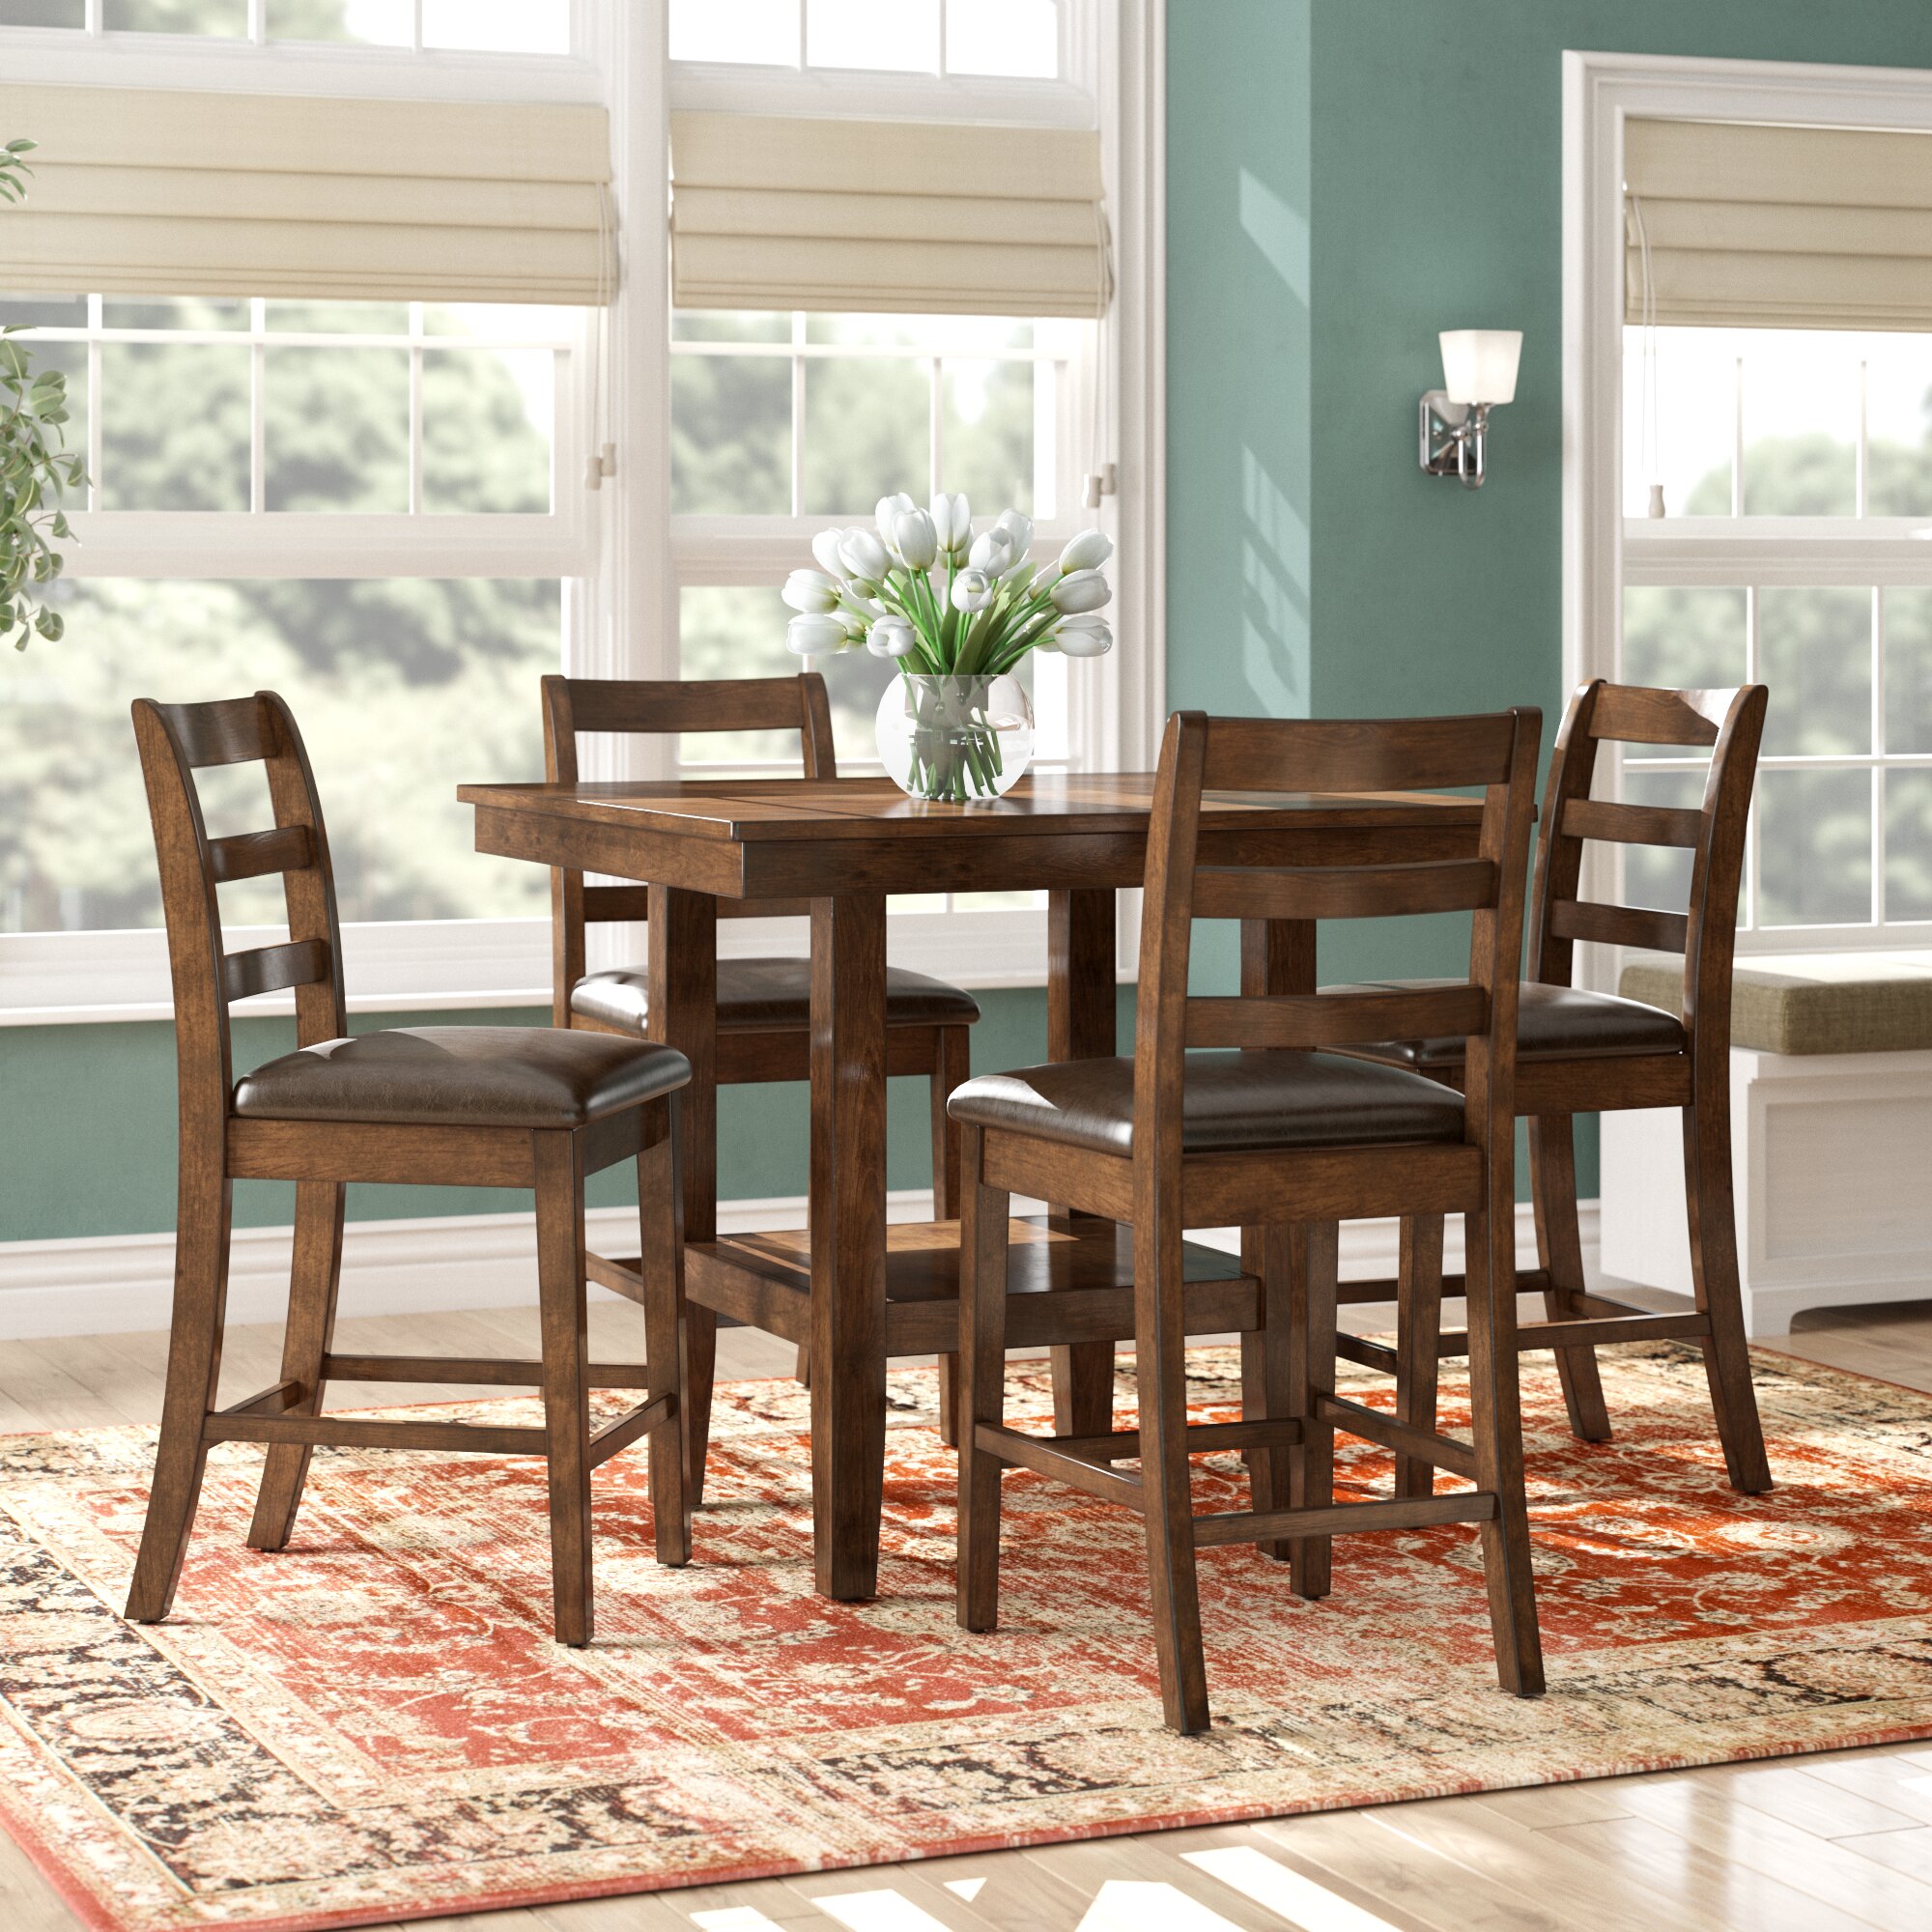 Details about   Dining Table and Chairs 4 2 Seater Solid Wood Kitchen Furniture Dining Room Set 